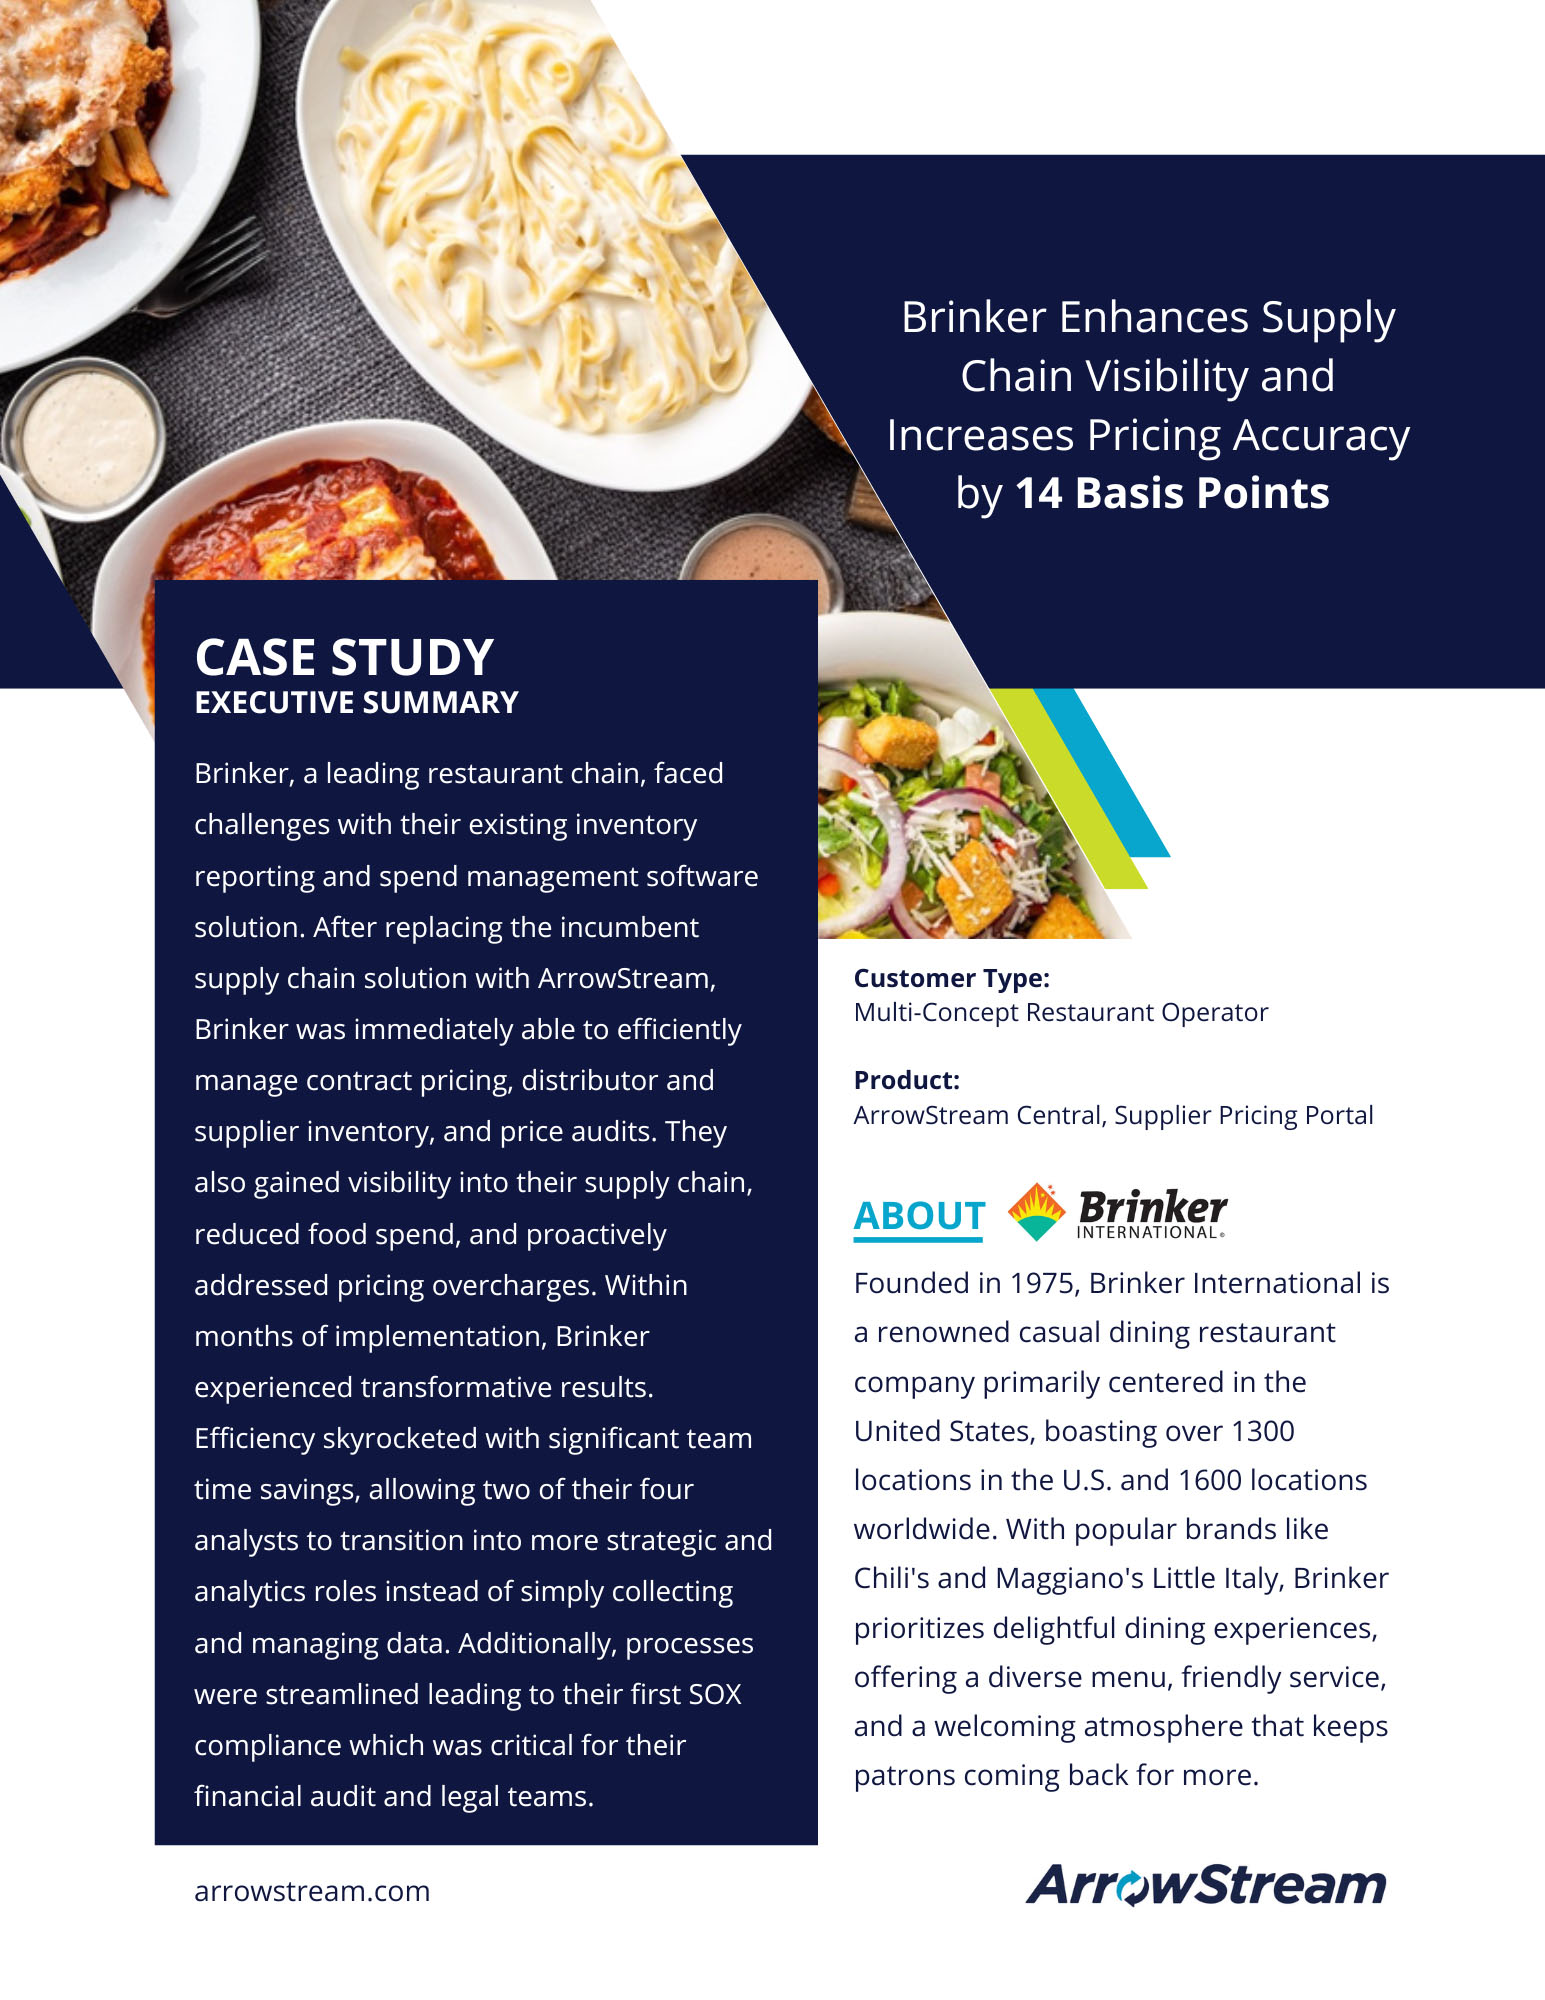 Brinker Enhances Supply Chain Visibility and Increases Pricing Accuracy by 14 Basis Points